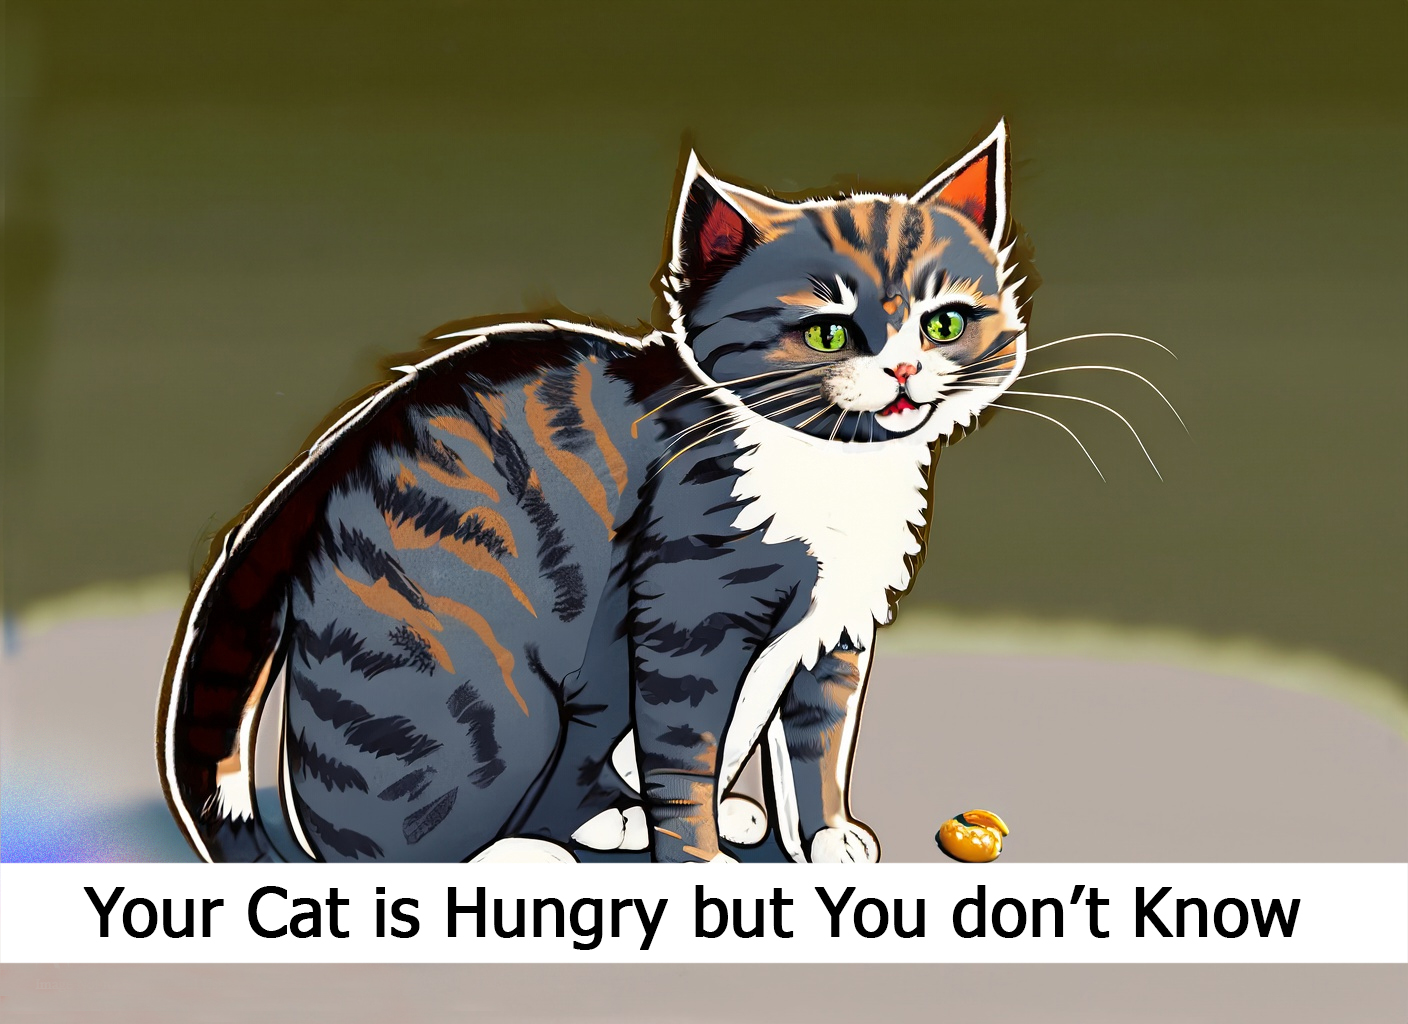 Cats are Hungry Most of the Time